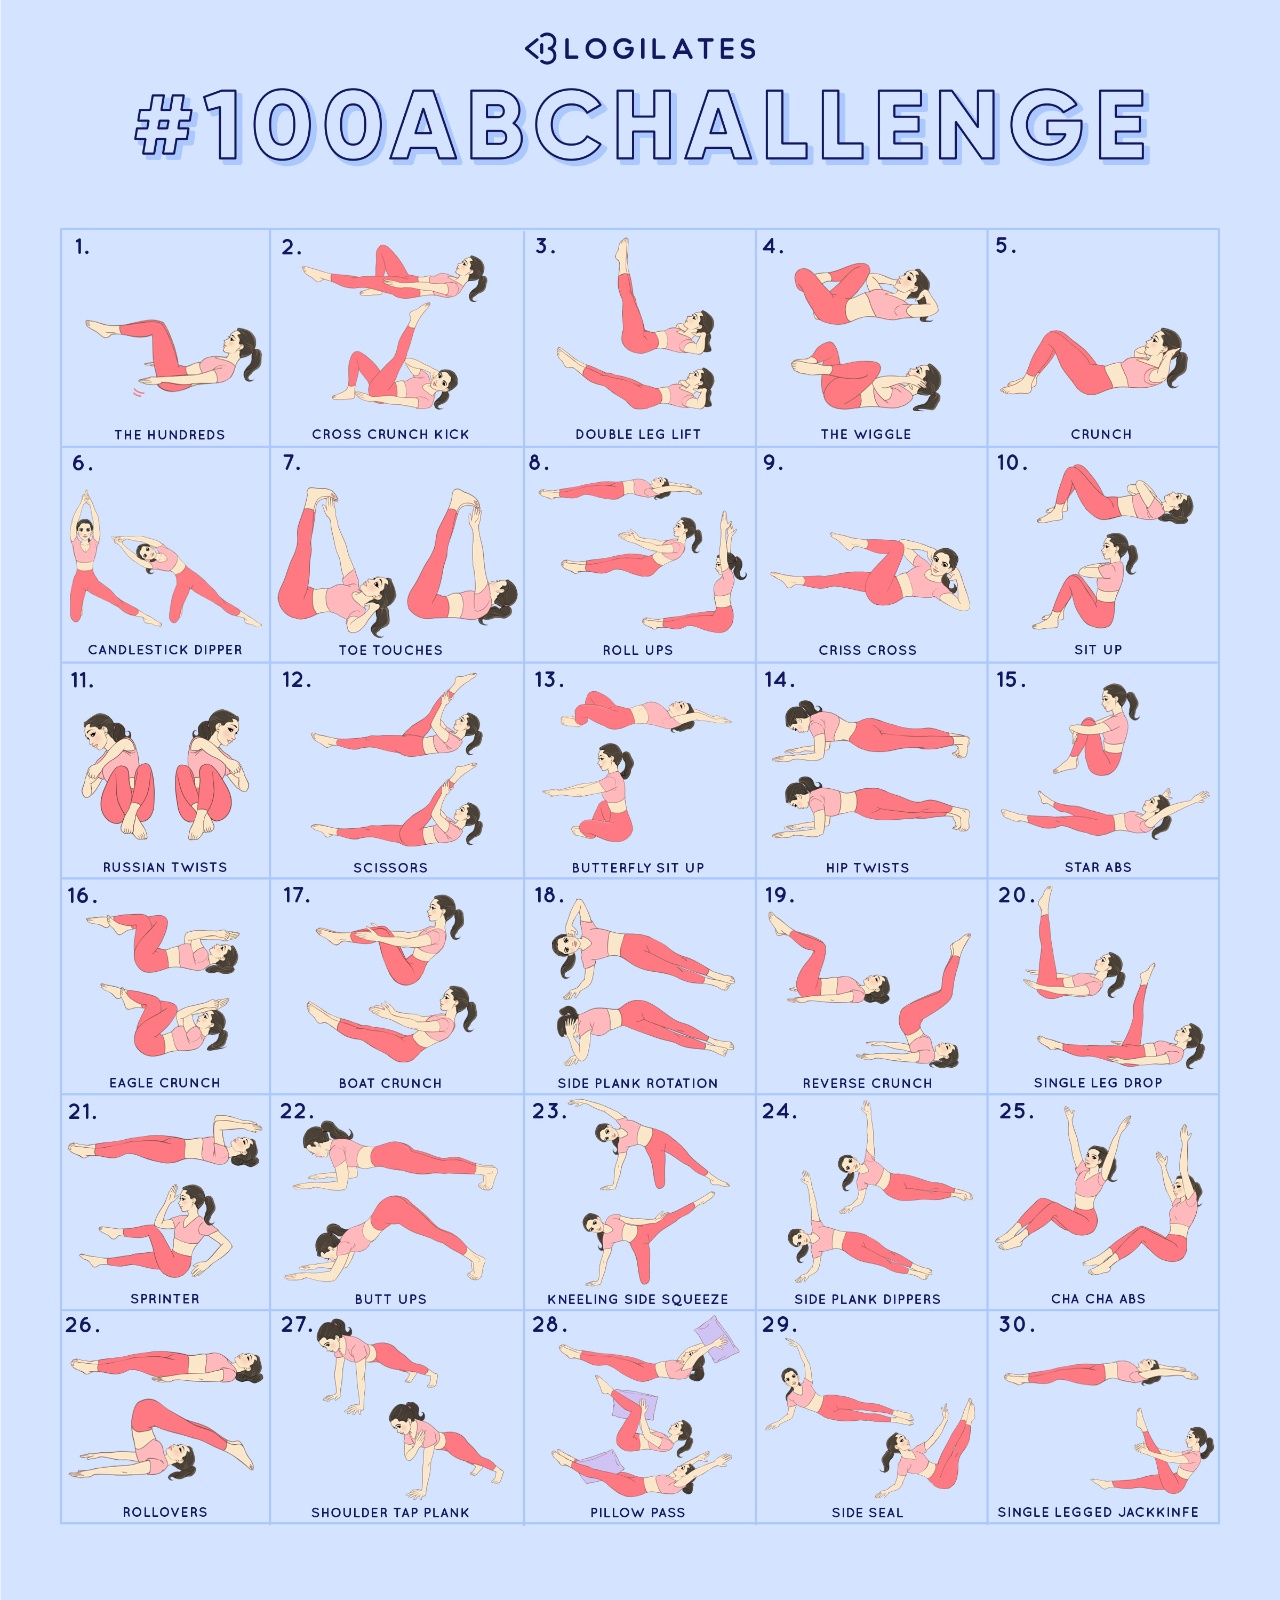 Get Your Dream Abs with this 30 Day Challenge